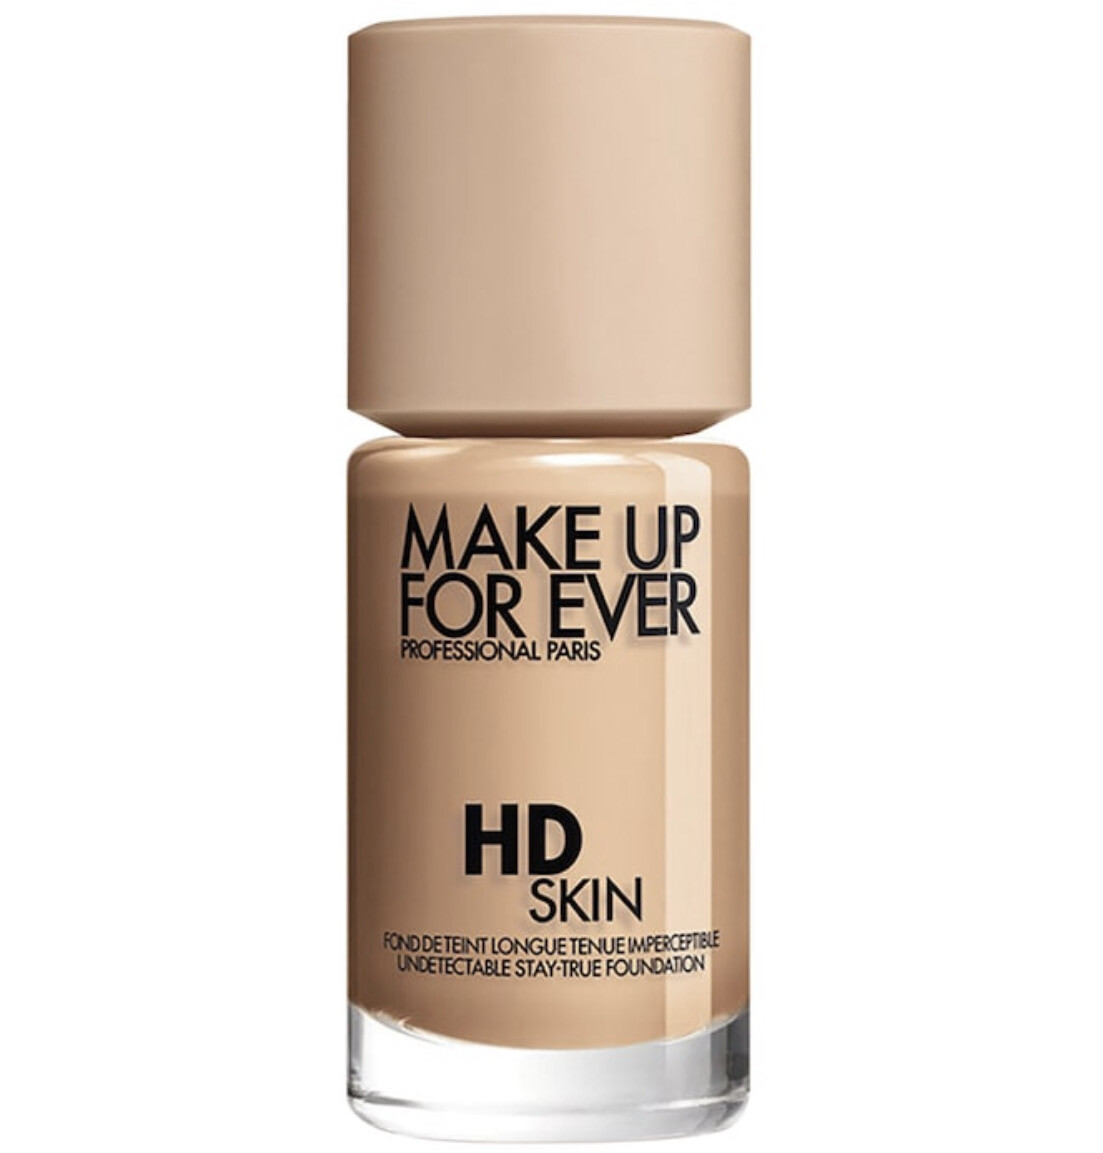 Make Up For Ever - HD Skin Undetectable Longwear Foundation | 2N22 Nude - for light to Medium skin tones with neutral undertones